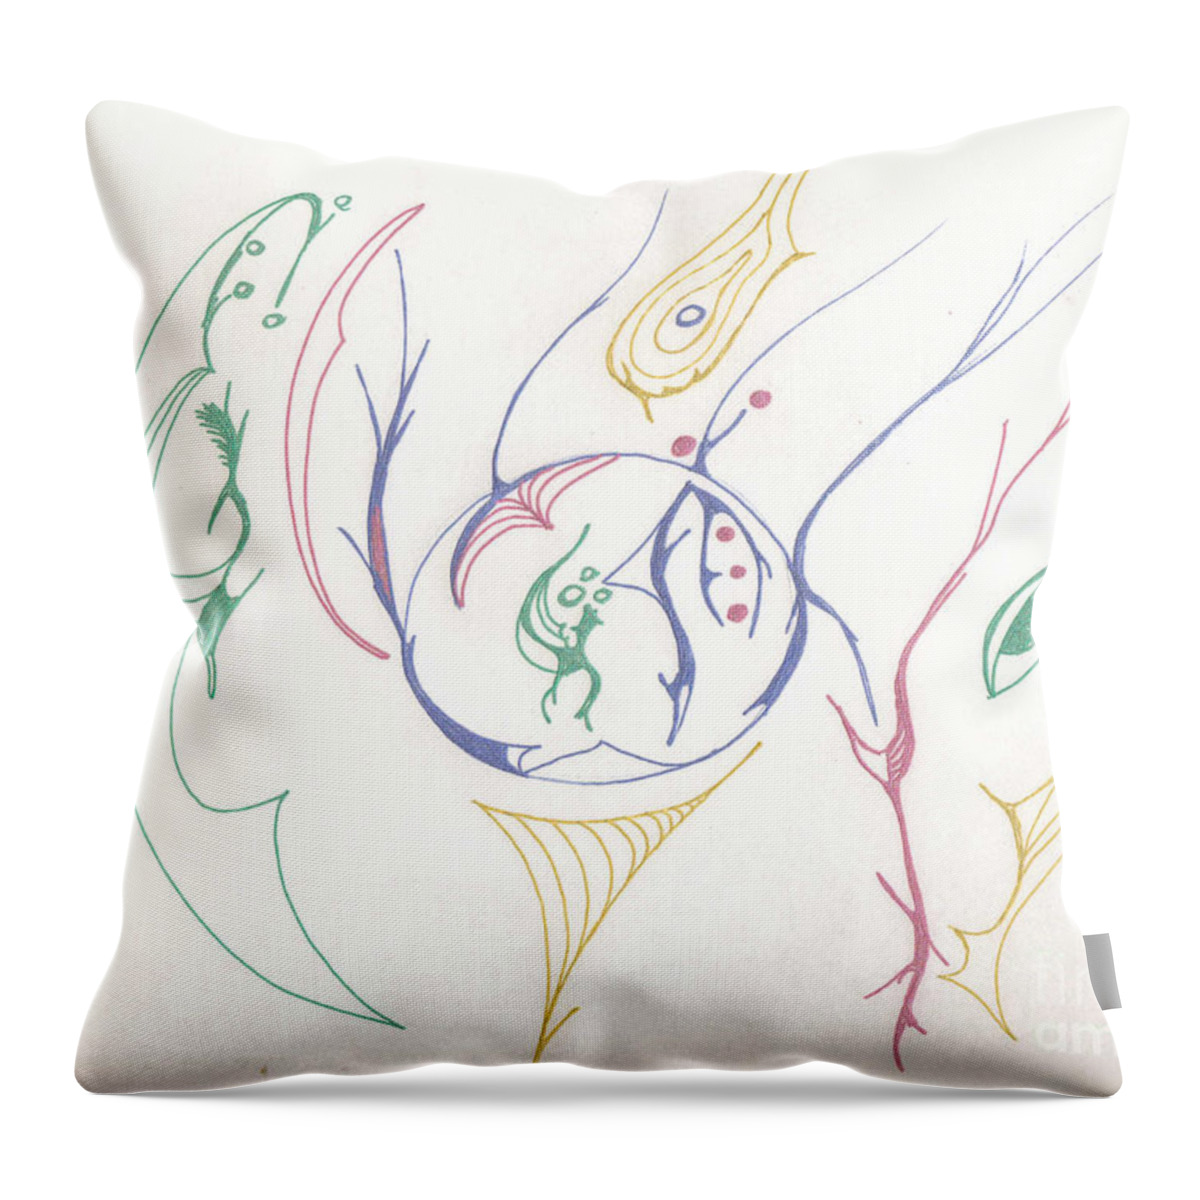 Creative Lines Throw Pillow featuring the drawing Center Orb by Mary Mikawoz